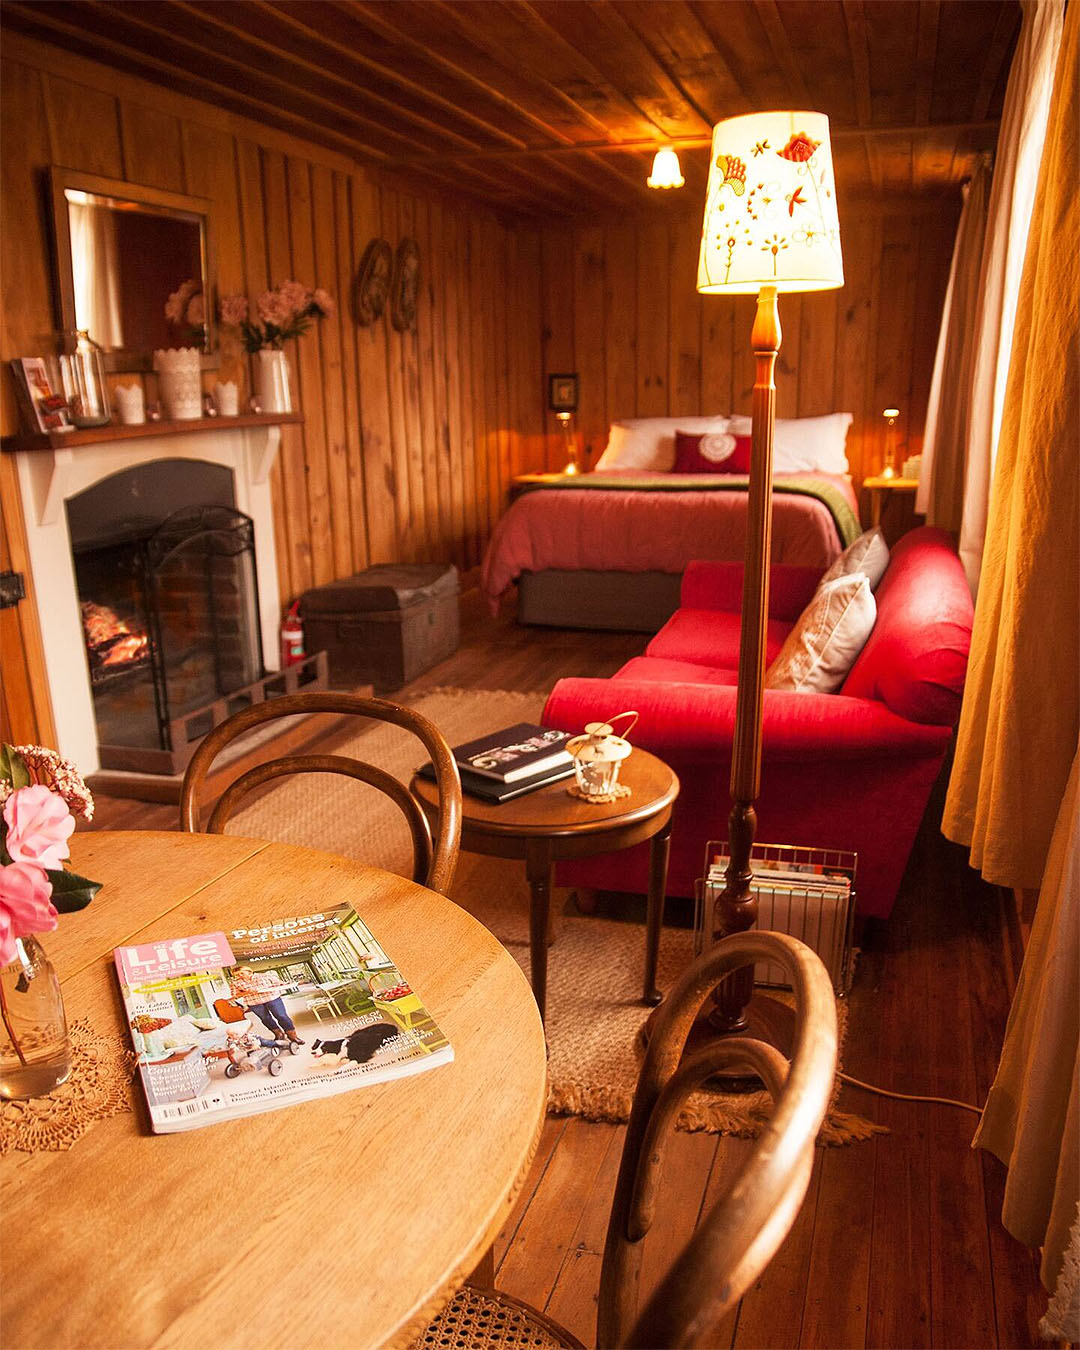 A cosy bedroom at Red Cottages showing vintage furnishings and a wood-burning fireplace.